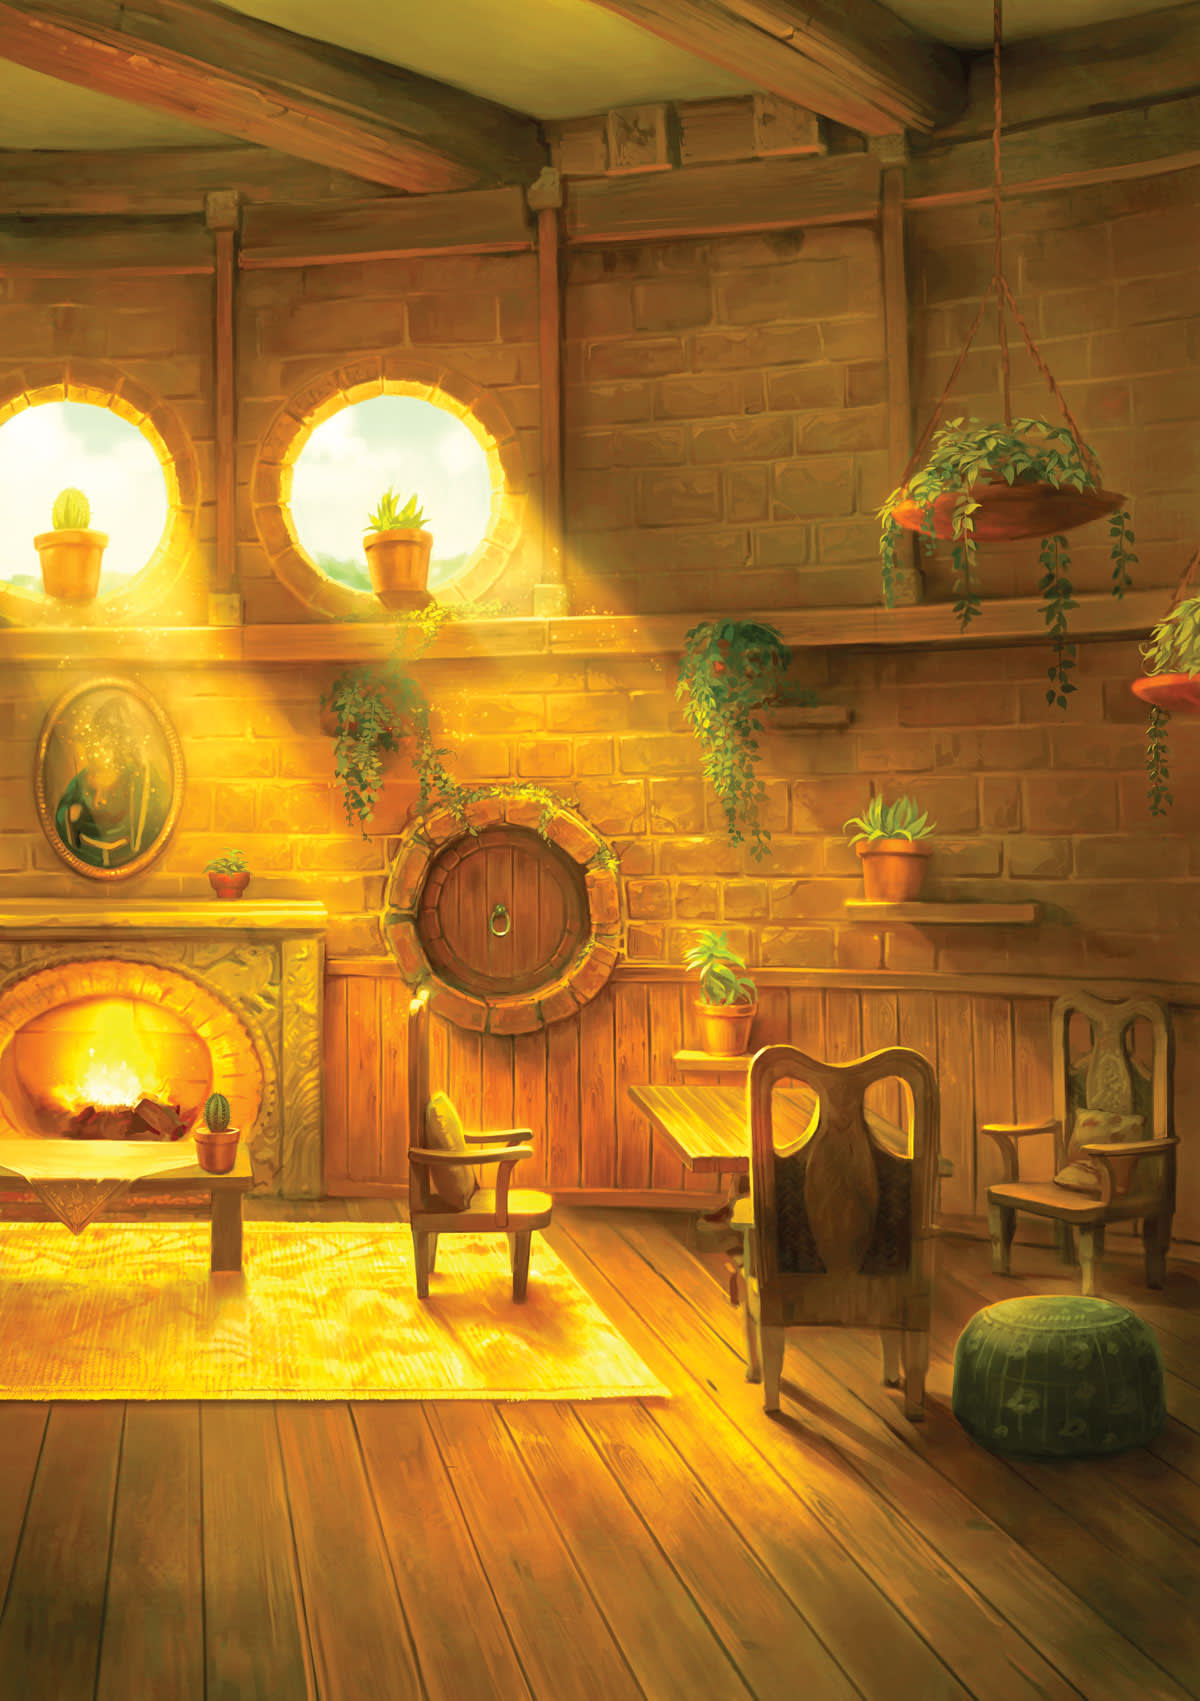 A cozy, rustic room with a fireplace, chairs, and potted plants. - Hufflepuff